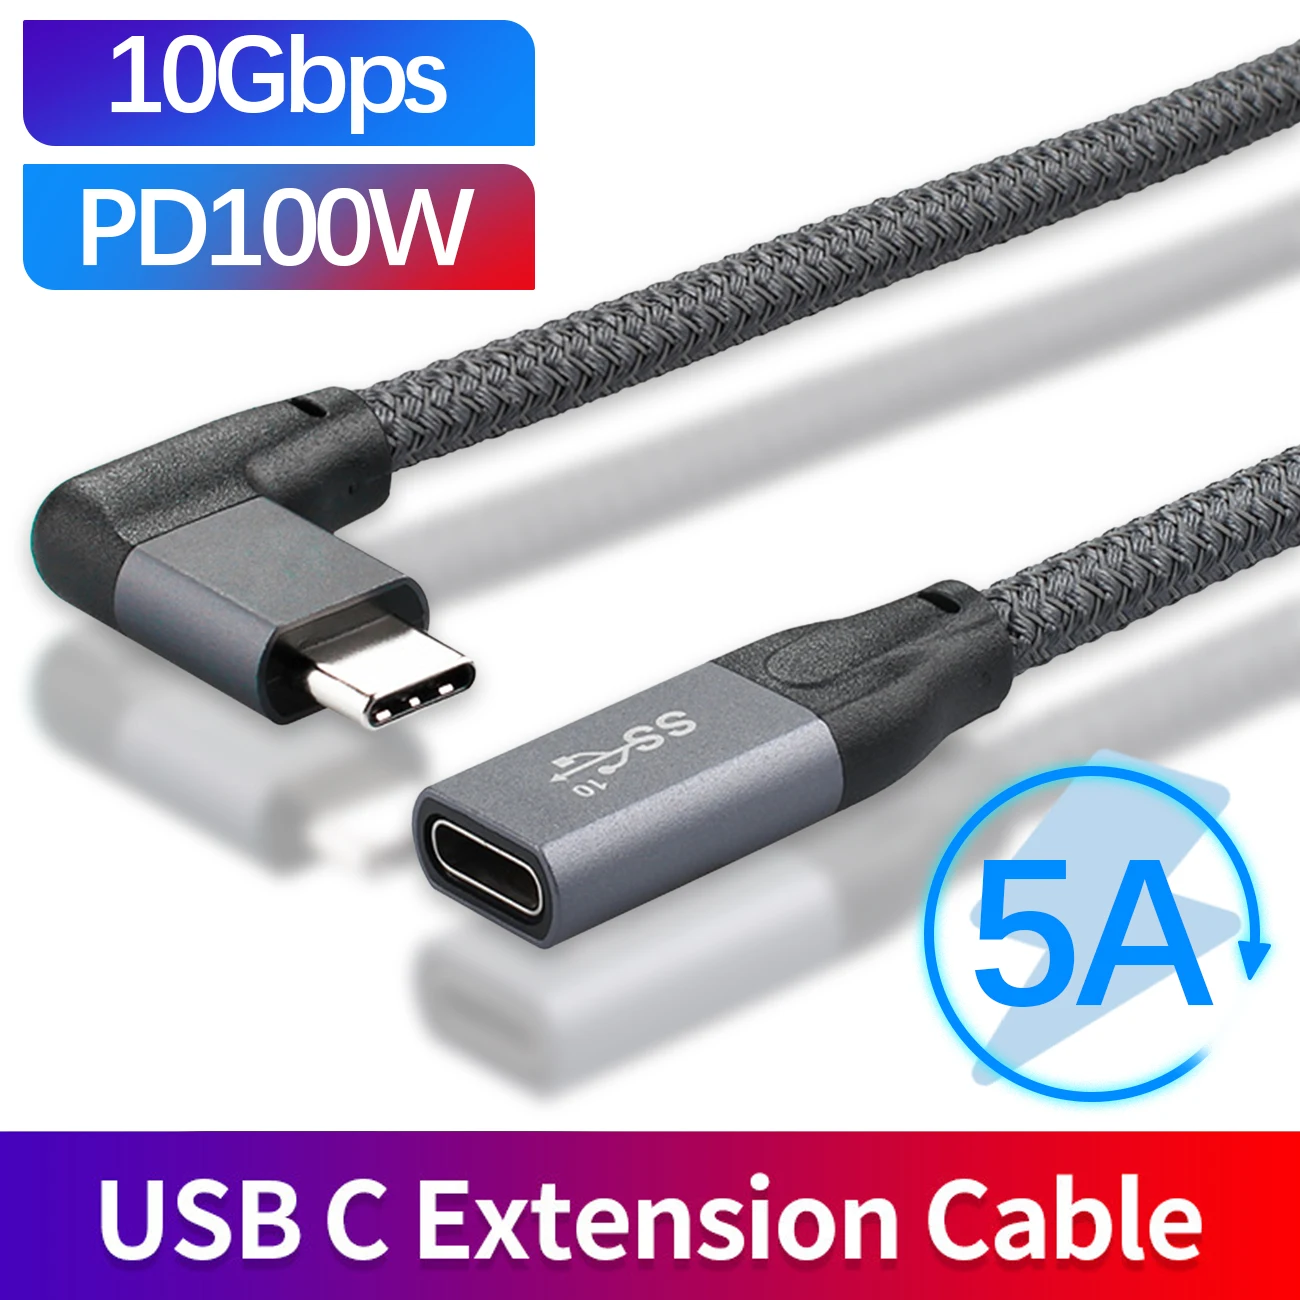 

100W PD 5A Curved USB3.1 Type-C Extension Cable 4K @60Hz 10Gbps USB-C Gen 2 Extender Cord For Macbook/Nintendo/ASUS/HP Laptop